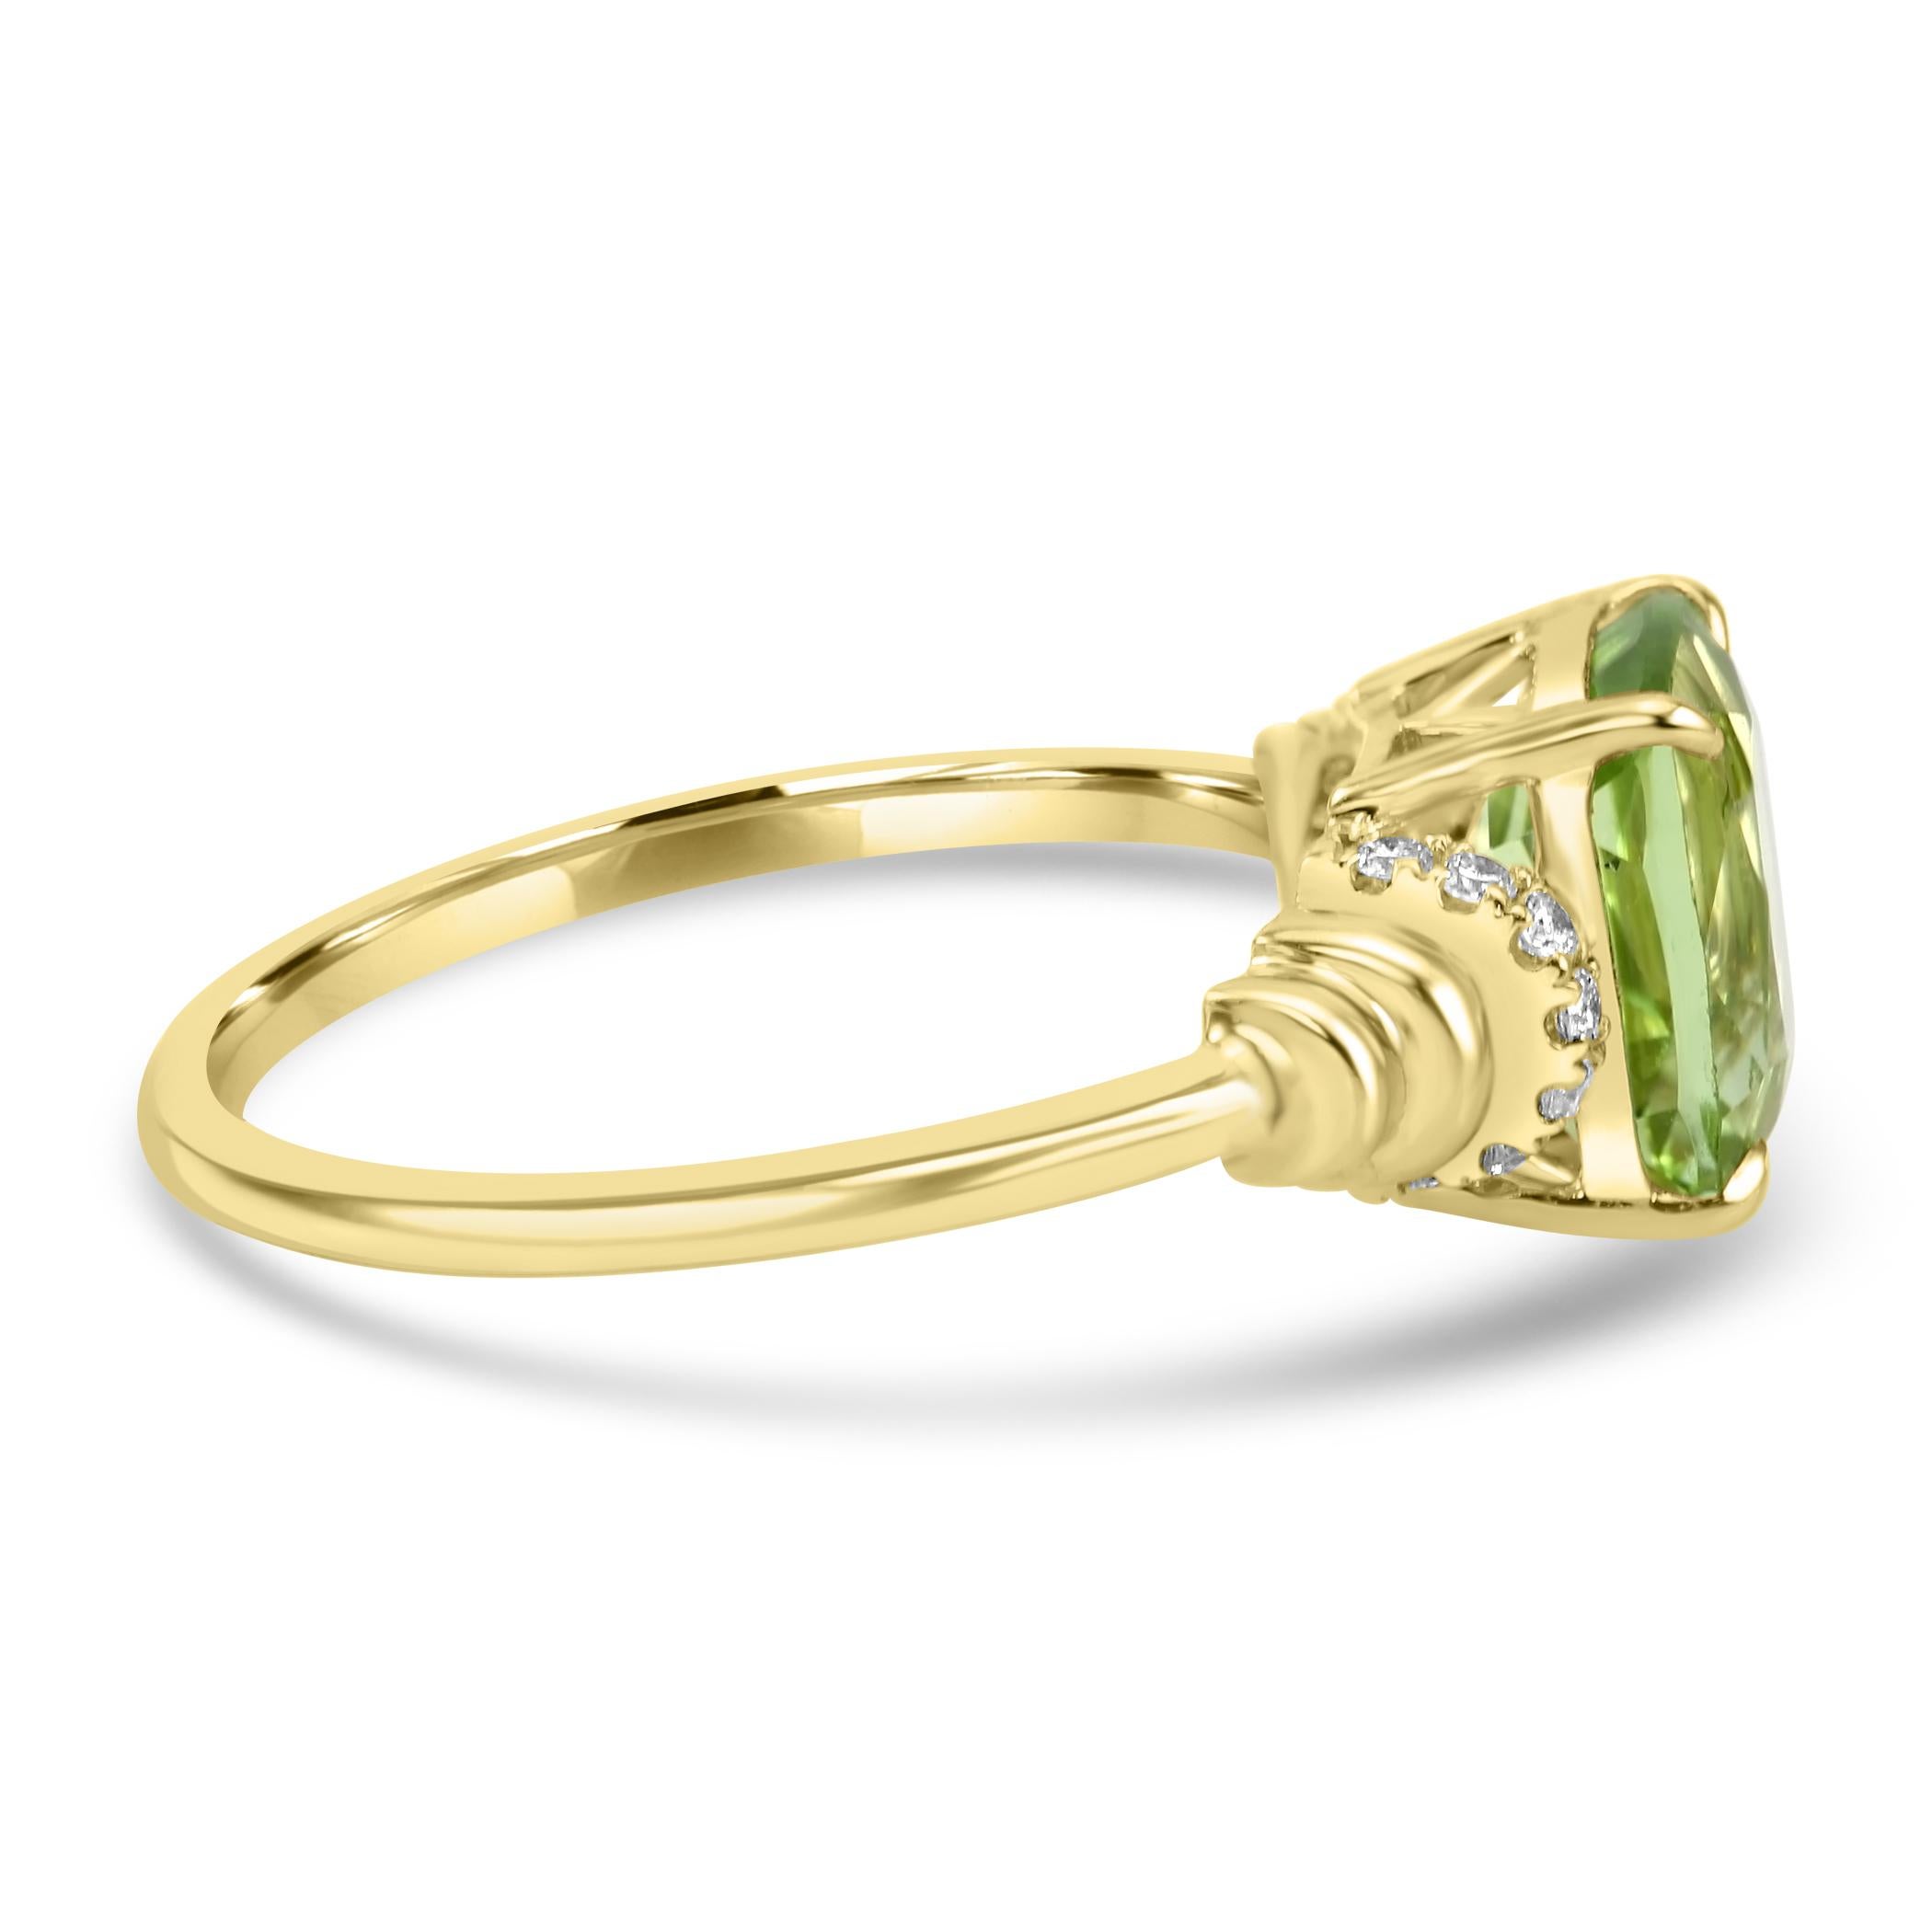 The centerpiece of this ring is a captivating Green Peridot, boasting a generous 2.42 carats. This vivid gemstone, with its fresh and lively green hue, becomes the focal point of a design that exudes sophistication and charm. 

On either side of the